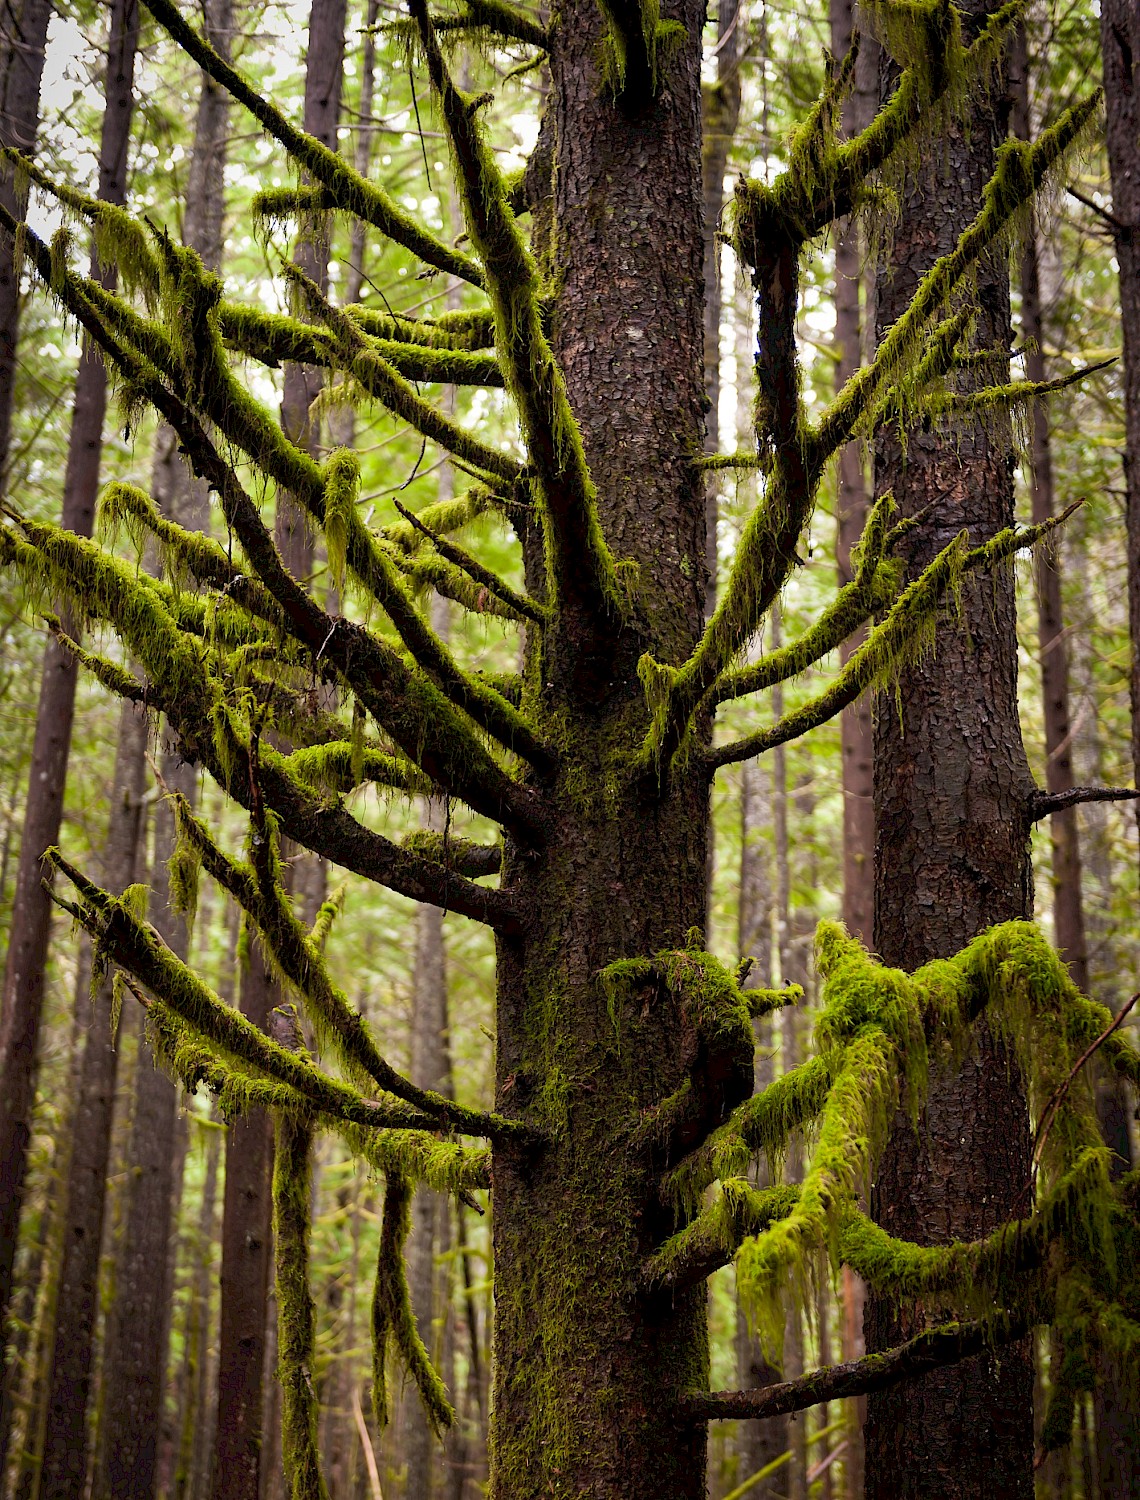 Moss covered tree in the Squamish rainforest